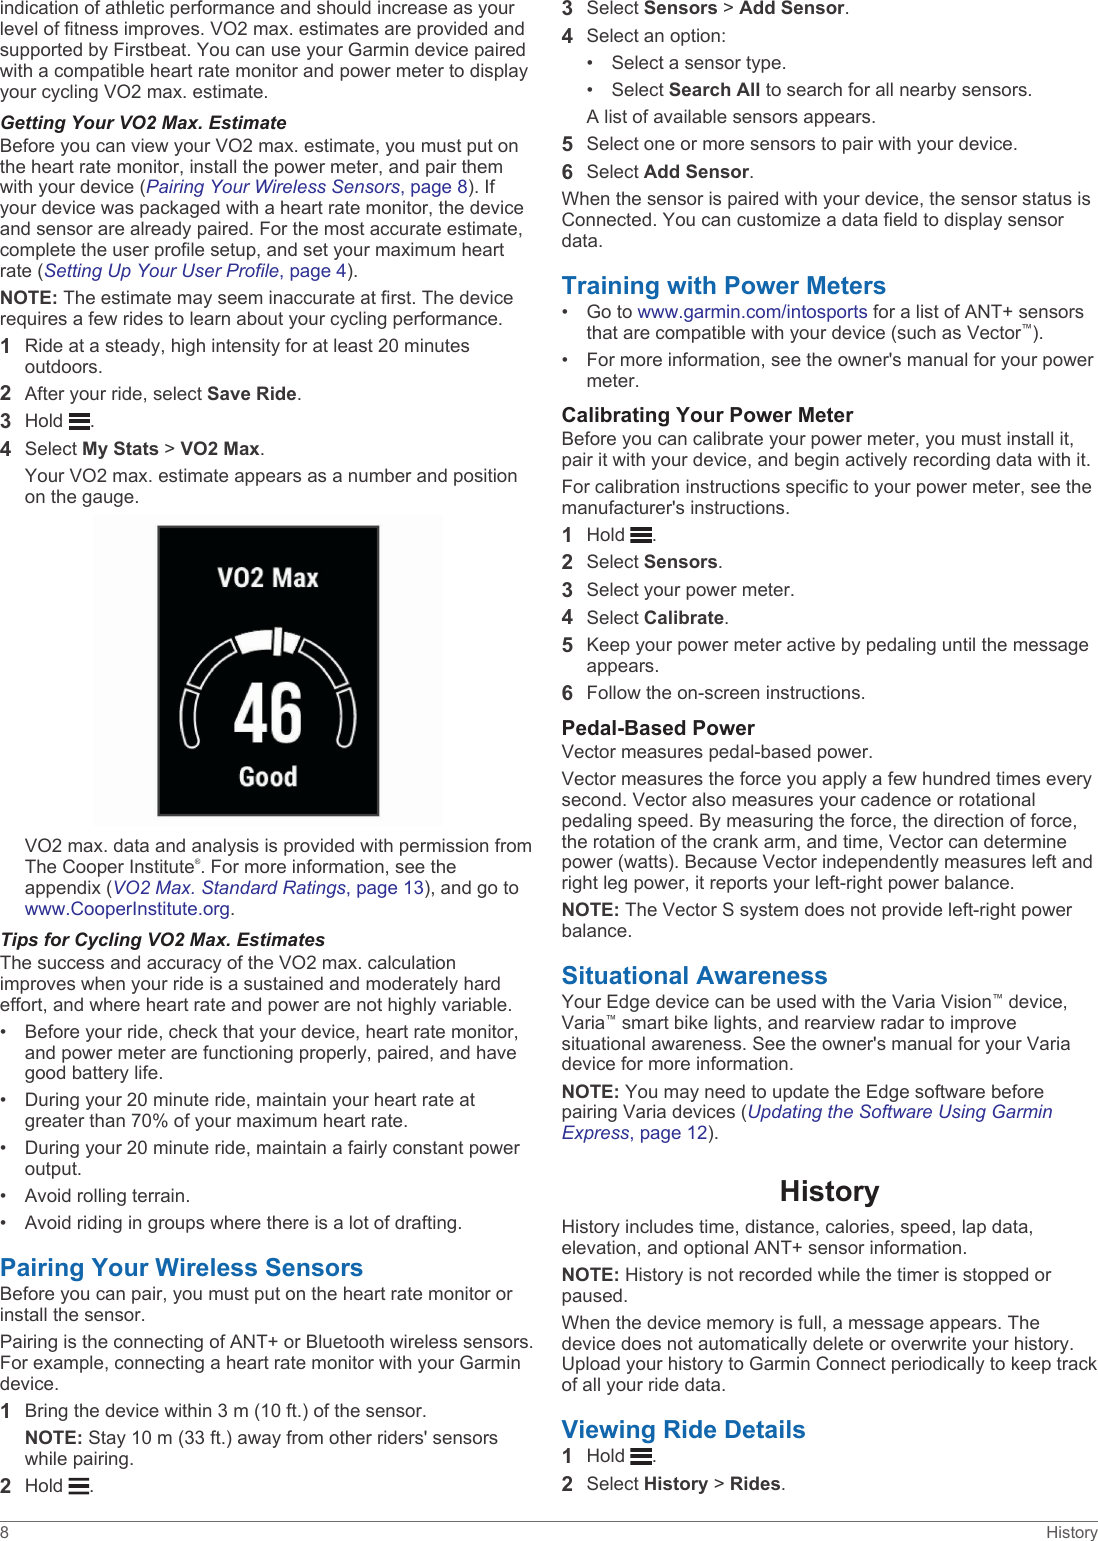 indication of athletic performance and should increase as your level of fitness improves. VO2 max. estimates are provided and supported by Firstbeat. You can use your Garmin device paired with a compatible heart rate monitor and power meter to display your cycling VO2 max. estimate.Getting Your VO2 Max. EstimateBefore you can view your VO2 max. estimate, you must put on the heart rate monitor, install the power meter, and pair them with your device (Pairing Your Wireless Sensors, page 8). If your device was packaged with a heart rate monitor, the device and sensor are already paired. For the most accurate estimate, complete the user profile setup, and set your maximum heart rate (Setting Up Your User Profile, page 4).NOTE: The estimate may seem inaccurate at first. The device requires a few rides to learn about your cycling performance.1Ride at a steady, high intensity for at least 20 minutes outdoors.2After your ride, select Save Ride.3Hold  .4Select My Stats &gt; VO2 Max.Your VO2 max. estimate appears as a number and position on the gauge.VO2 max. data and analysis is provided with permission from The Cooper Institute®. For more information, see the appendix (VO2 Max. Standard Ratings, page 13), and go to www.CooperInstitute.org.Tips for Cycling VO2 Max. EstimatesThe success and accuracy of the VO2 max. calculation improves when your ride is a sustained and moderately hard effort, and where heart rate and power are not highly variable.• Before your ride, check that your device, heart rate monitor, and power meter are functioning properly, paired, and have good battery life.• During your 20 minute ride, maintain your heart rate at greater than 70% of your maximum heart rate.• During your 20 minute ride, maintain a fairly constant power output.• Avoid rolling terrain.• Avoid riding in groups where there is a lot of drafting.Pairing Your Wireless SensorsBefore you can pair, you must put on the heart rate monitor or install the sensor.Pairing is the connecting of ANT+ or Bluetooth wireless sensors. For example, connecting a heart rate monitor with your Garmin device.1Bring the device within 3 m (10 ft.) of the sensor.NOTE: Stay 10 m (33 ft.) away from other riders&apos; sensors while pairing.2Hold  .3Select Sensors &gt; Add Sensor.4Select an option:• Select a sensor type.• Select Search All to search for all nearby sensors.A list of available sensors appears.5Select one or more sensors to pair with your device.6Select Add Sensor.When the sensor is paired with your device, the sensor status is Connected. You can customize a data field to display sensor data.Training with Power Meters• Go to www.garmin.com/intosports for a list of ANT+ sensors that are compatible with your device (such as Vector™).• For more information, see the owner&apos;s manual for your power meter.Calibrating Your Power MeterBefore you can calibrate your power meter, you must install it, pair it with your device, and begin actively recording data with it.For calibration instructions specific to your power meter, see the manufacturer&apos;s instructions.1Hold  .2Select Sensors.3Select your power meter.4Select Calibrate.5Keep your power meter active by pedaling until the message appears.6Follow the on-screen instructions.Pedal-Based PowerVector measures pedal-based power.Vector measures the force you apply a few hundred times every second. Vector also measures your cadence or rotational pedaling speed. By measuring the force, the direction of force, the rotation of the crank arm, and time, Vector can determine power (watts). Because Vector independently measures left and right leg power, it reports your left-right power balance.NOTE: The Vector S system does not provide left-right power balance.Situational AwarenessYour Edge device can be used with the Varia Vision™ device, Varia™ smart bike lights, and rearview radar to improve situational awareness. See the owner&apos;s manual for your Varia device for more information.NOTE: You may need to update the Edge software before pairing Varia devices (Updating the Software Using Garmin Express, page 12).HistoryHistory includes time, distance, calories, speed, lap data, elevation, and optional ANT+ sensor information.NOTE: History is not recorded while the timer is stopped or paused.When the device memory is full, a message appears. The device does not automatically delete or overwrite your history. Upload your history to Garmin Connect periodically to keep track of all your ride data.Viewing Ride Details1Hold  .2Select History &gt; Rides.8 History